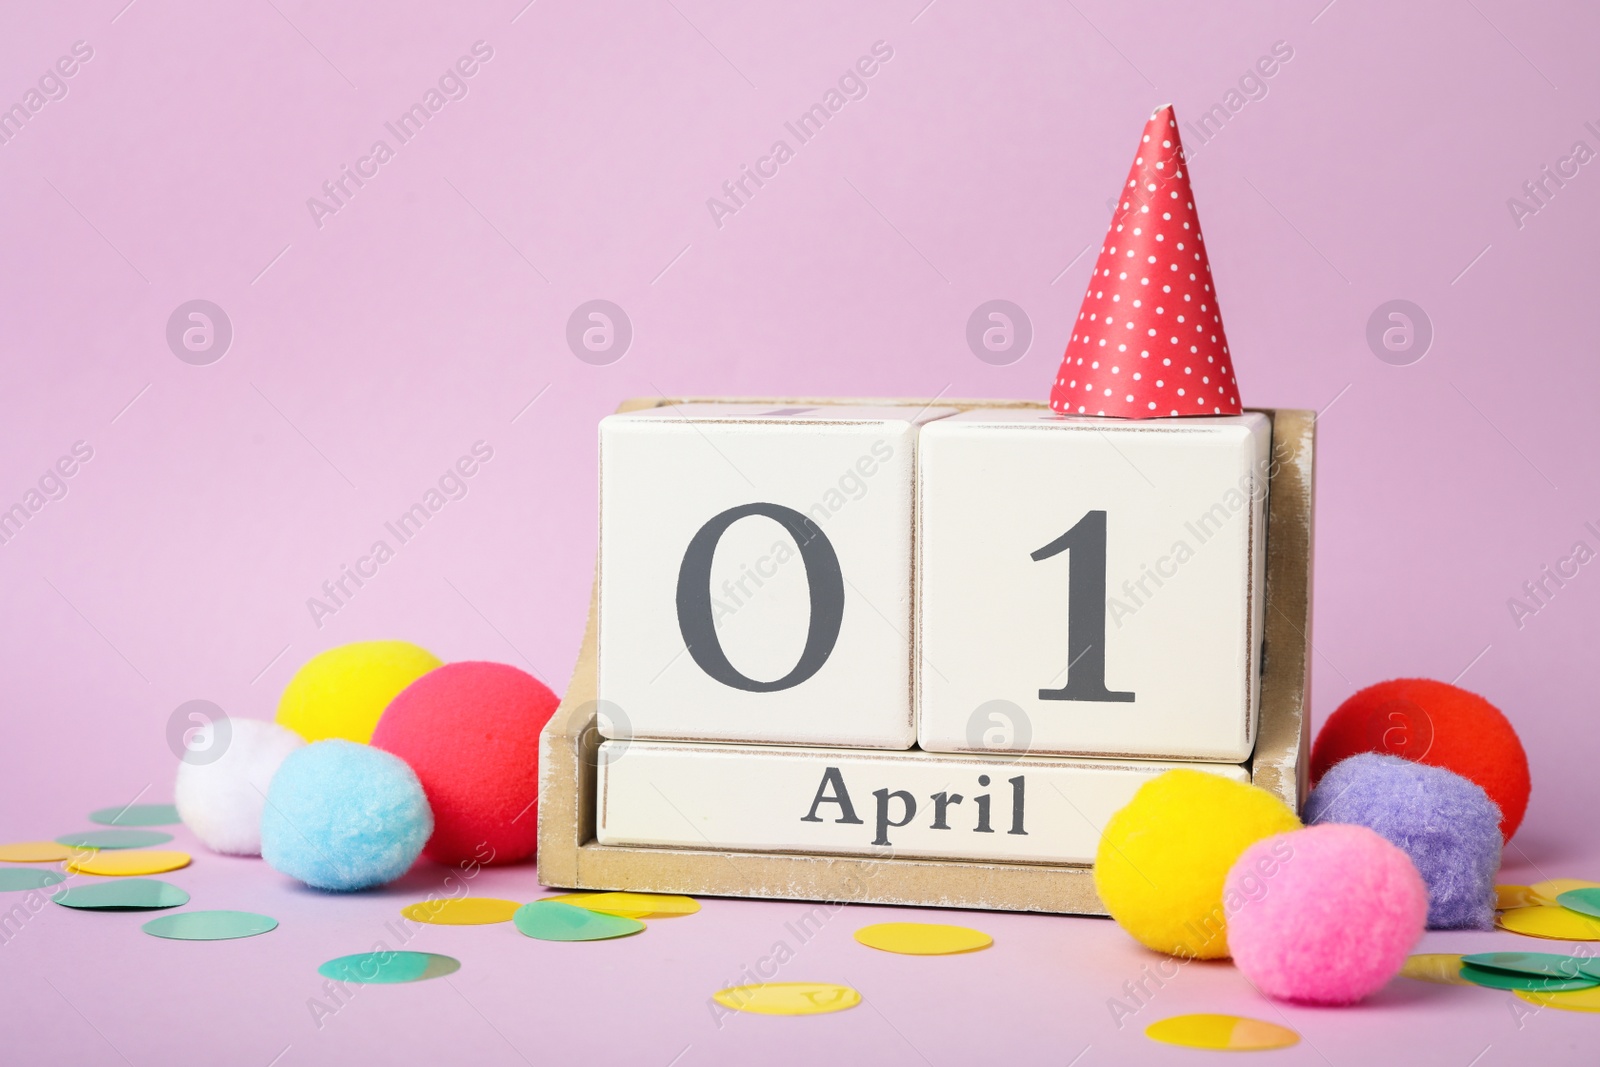 Photo of Wooden block calendar and party decor on violet background. April fool's day